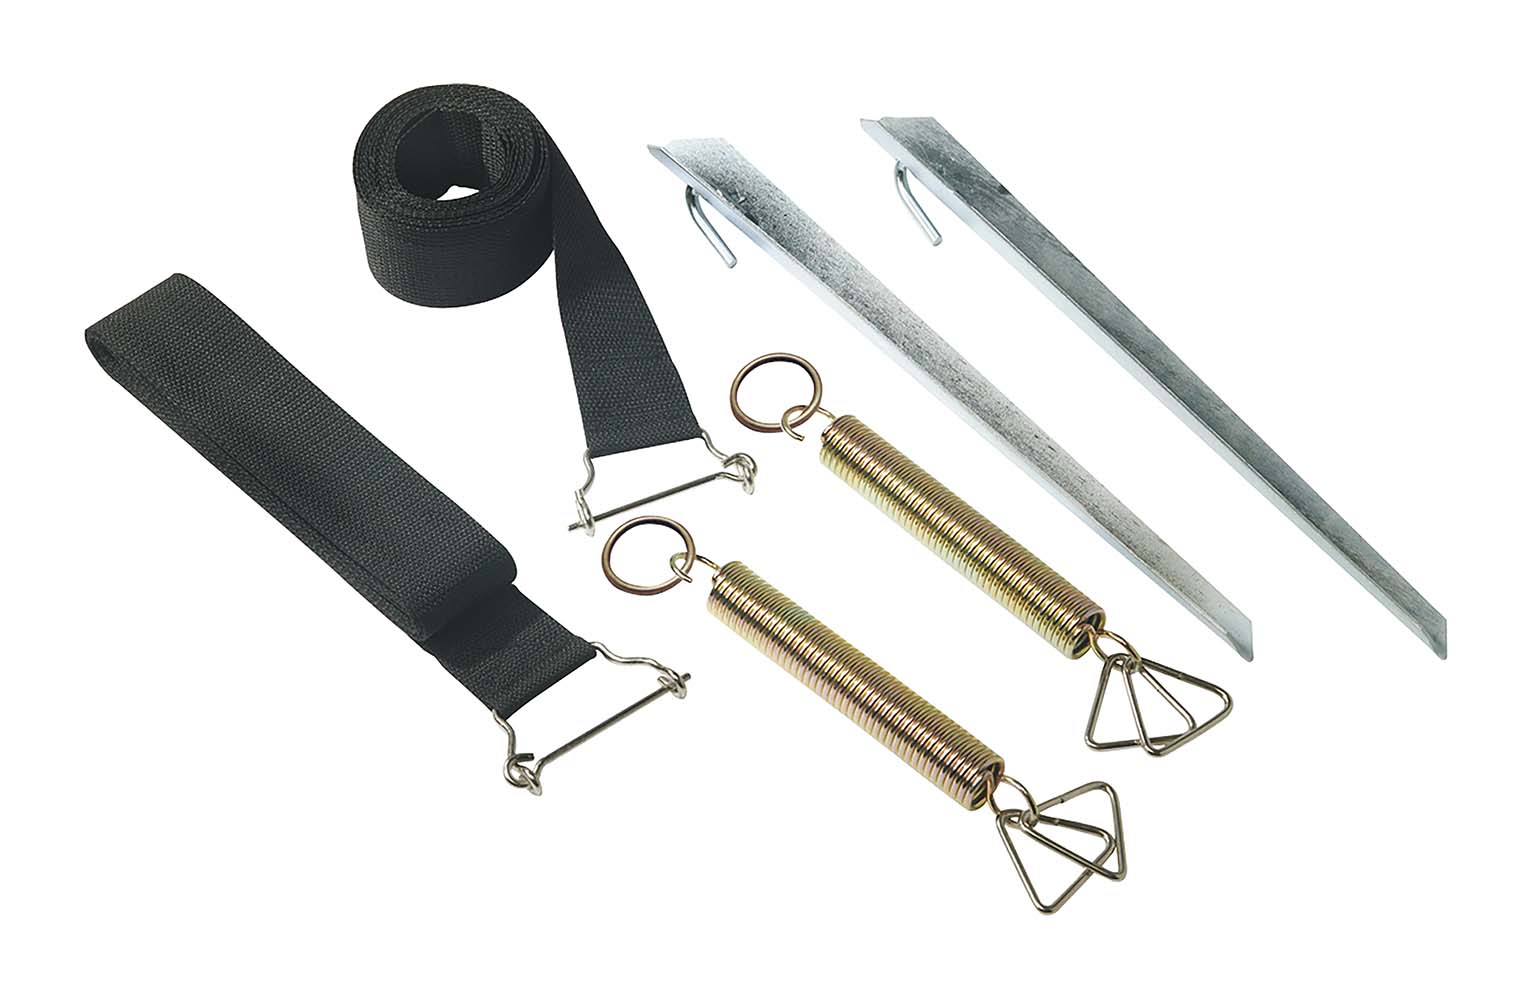 4163757 A universal storm strap set. Suitable for front tents with clips. Set consisting of 2x nylon storm straps of 3.5 meters, 2x springs and 2 storm pegs. The eyelet of the strap is can be easily and universally attached to the clip of a tent.